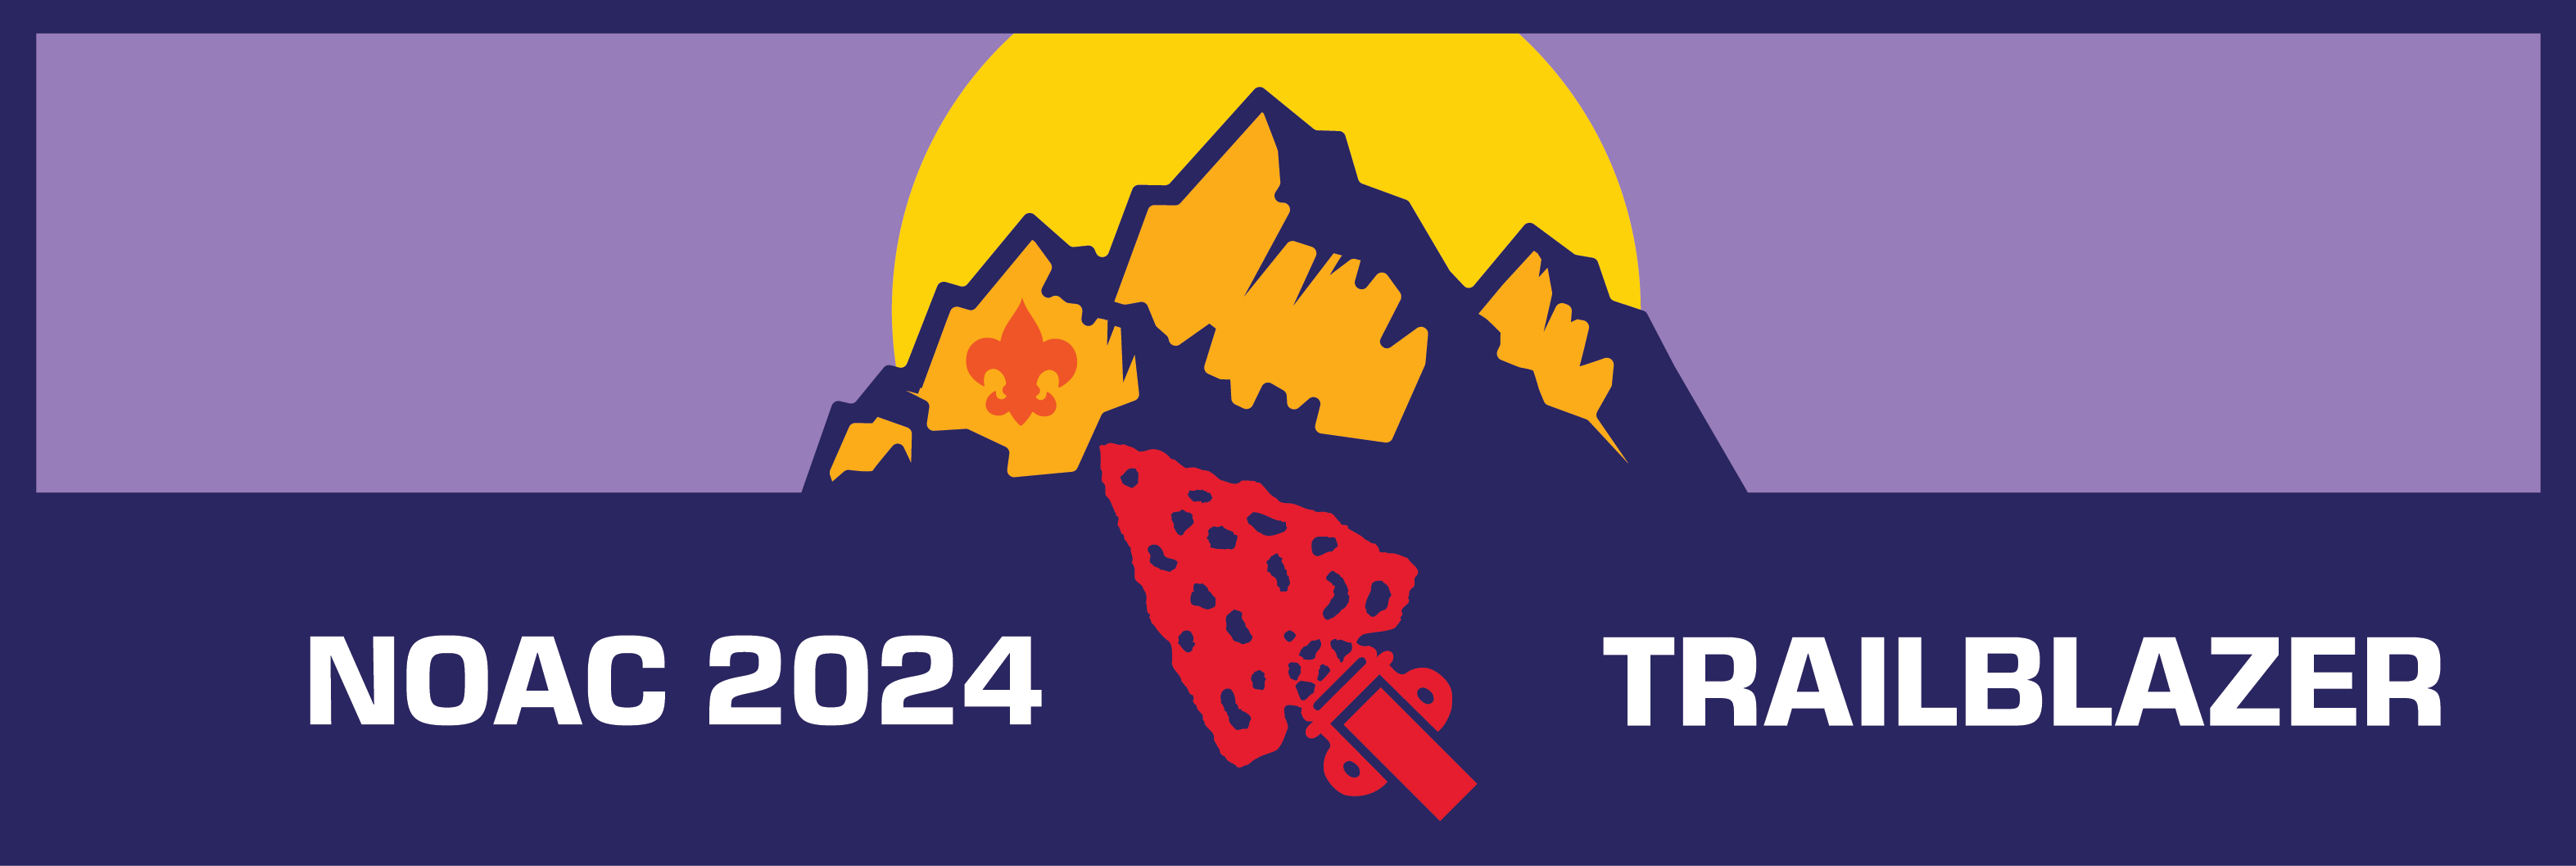 NOAC 2024 will be held at the University of Colorado Boulder from July 29th-August 3rd, 2024!